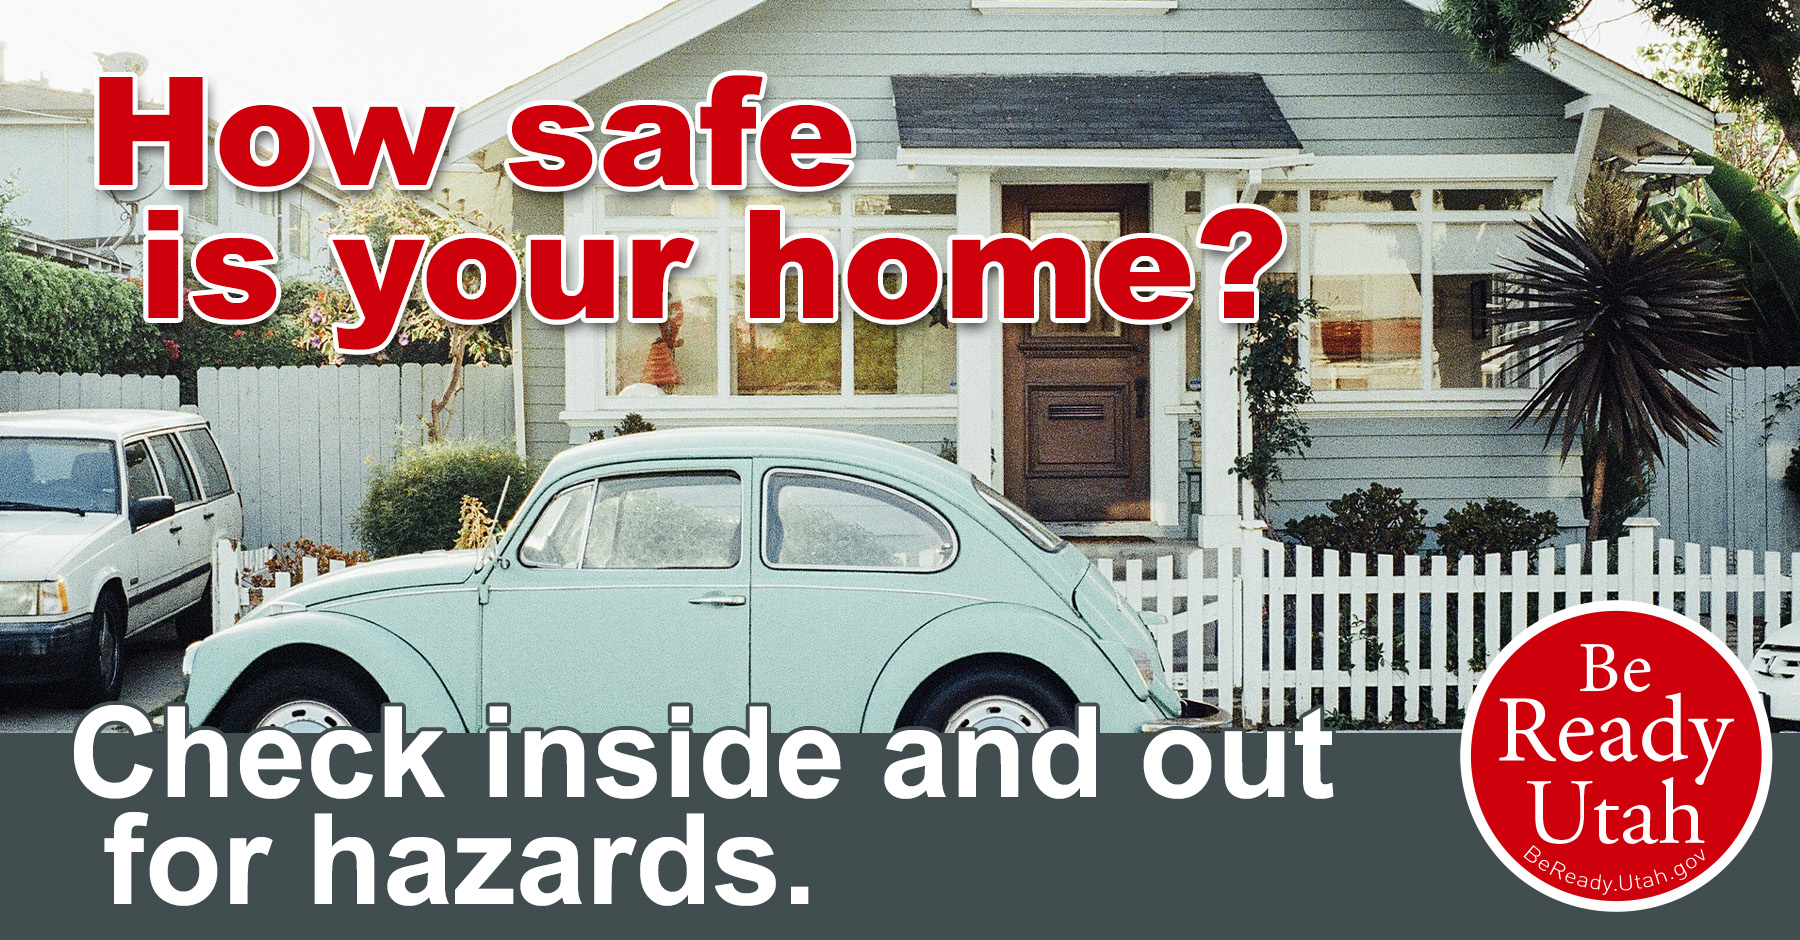 How safe is your home? Check inside and outside your home for hazards. VW Bug parked in front of a small home in a suburban neighborhood.